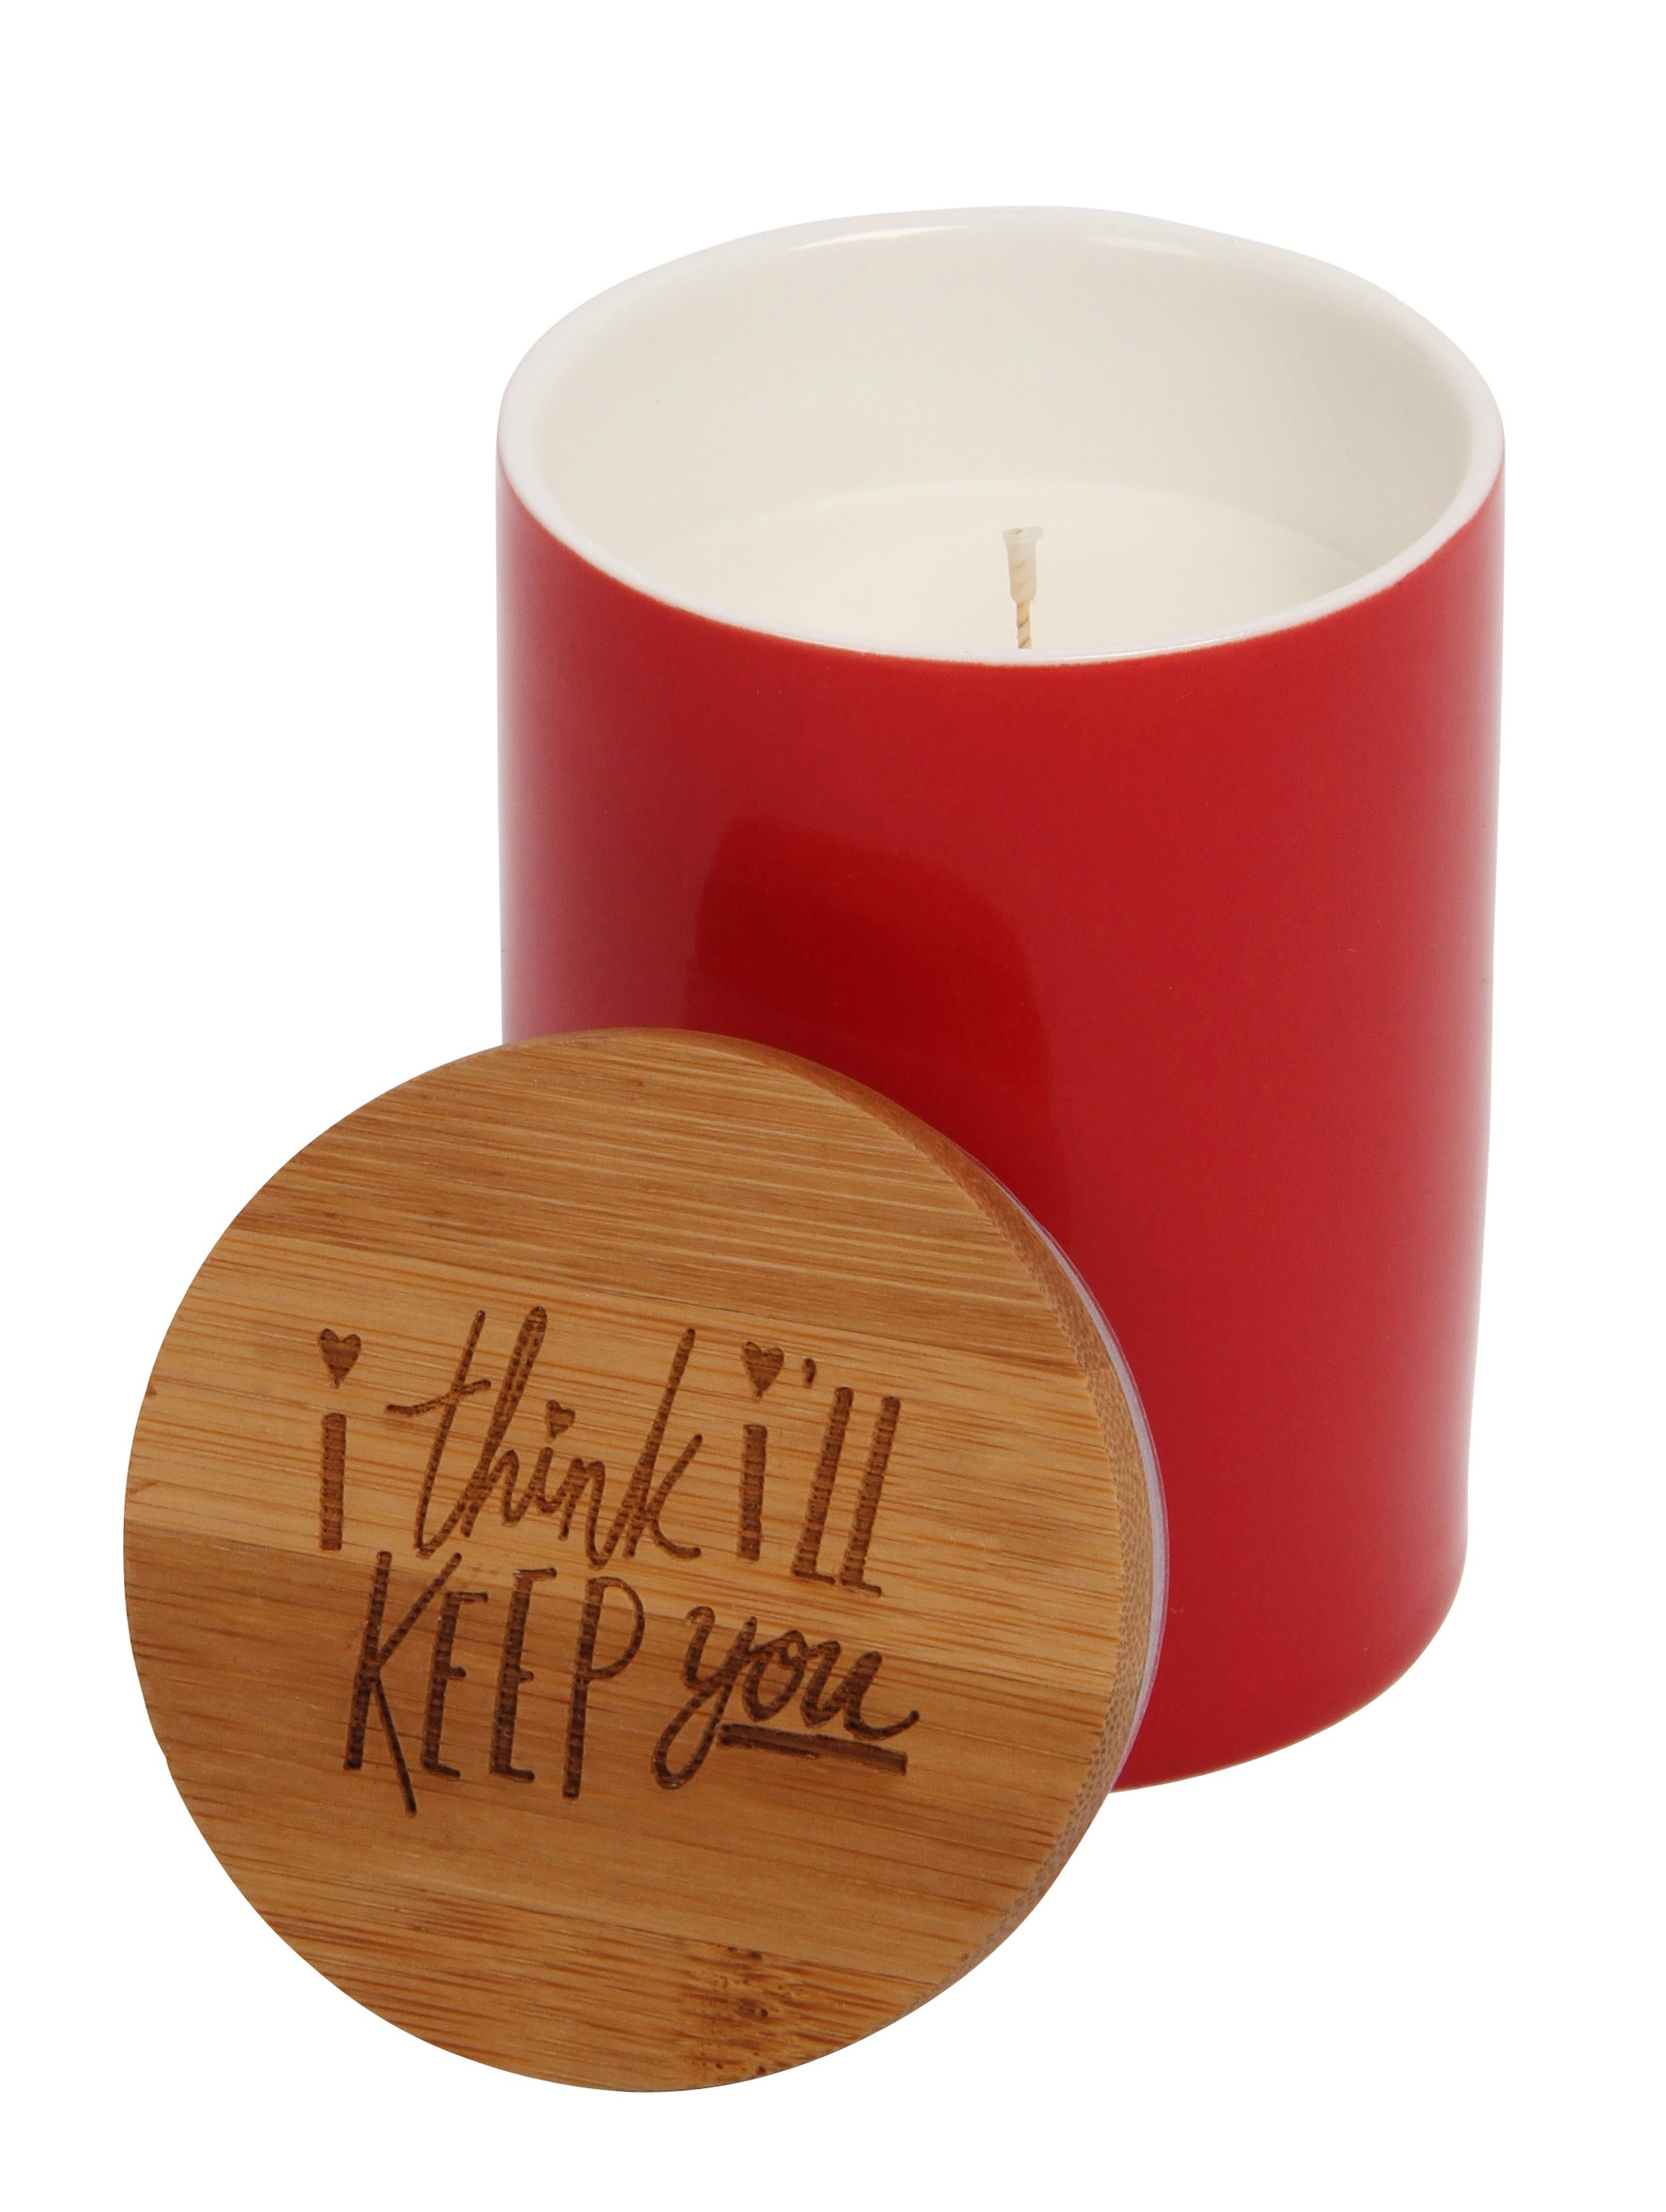 Candle from Paperchase